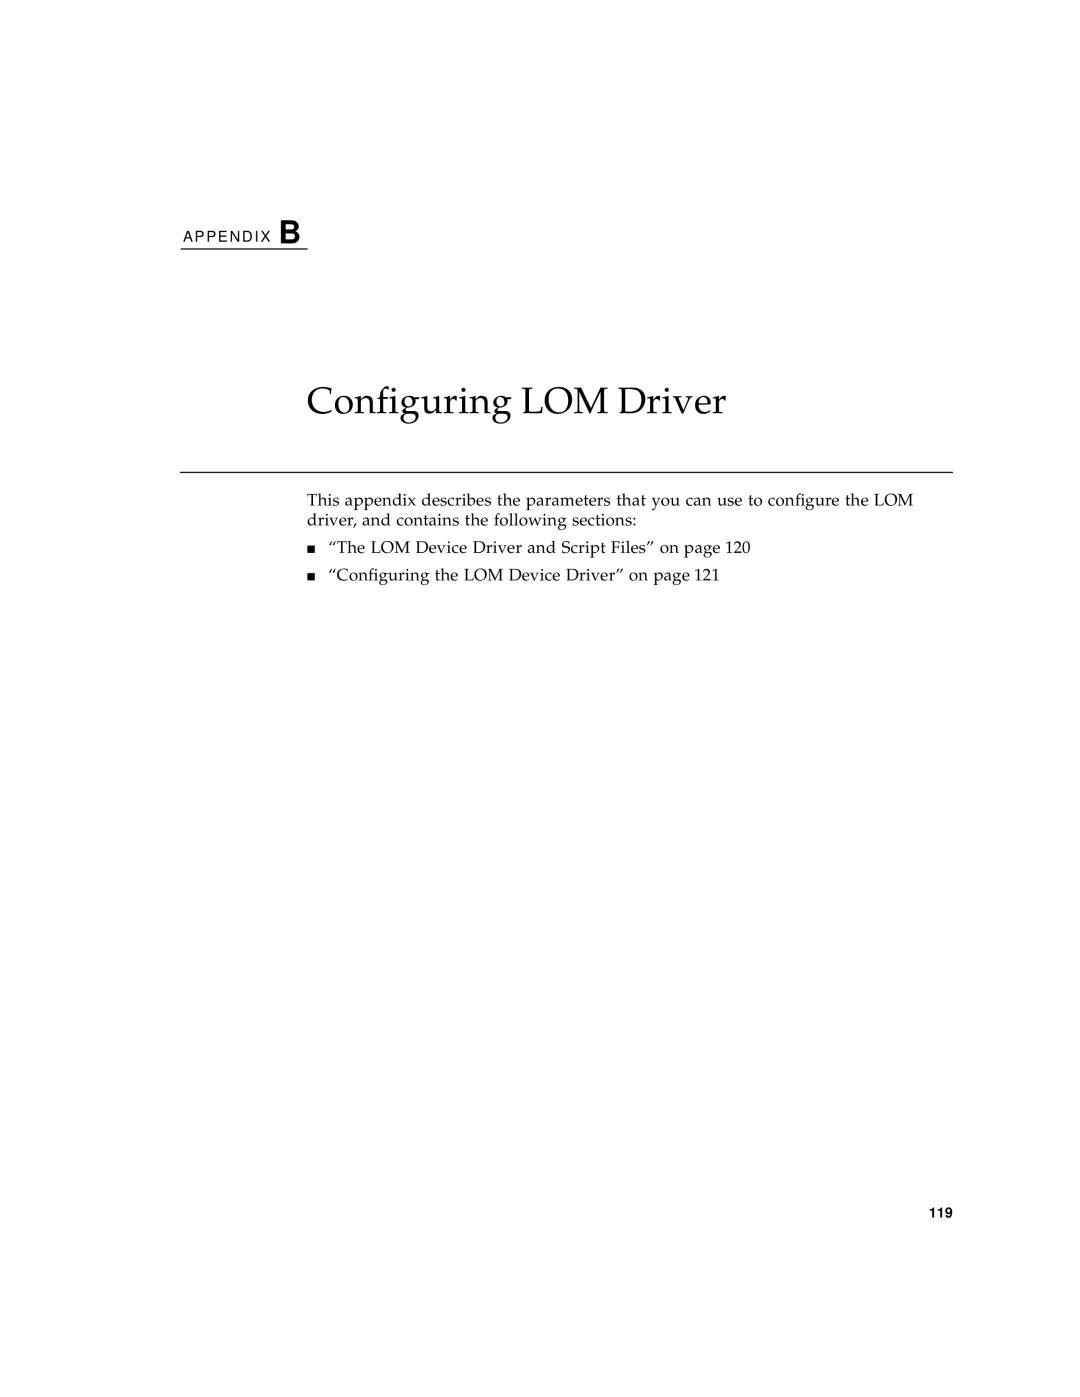 Sun Microsystems Sun Fire V100 Configuring LOM Driver, “The LOM Device Driver and Script Files” on page, A P P E N D I X B 